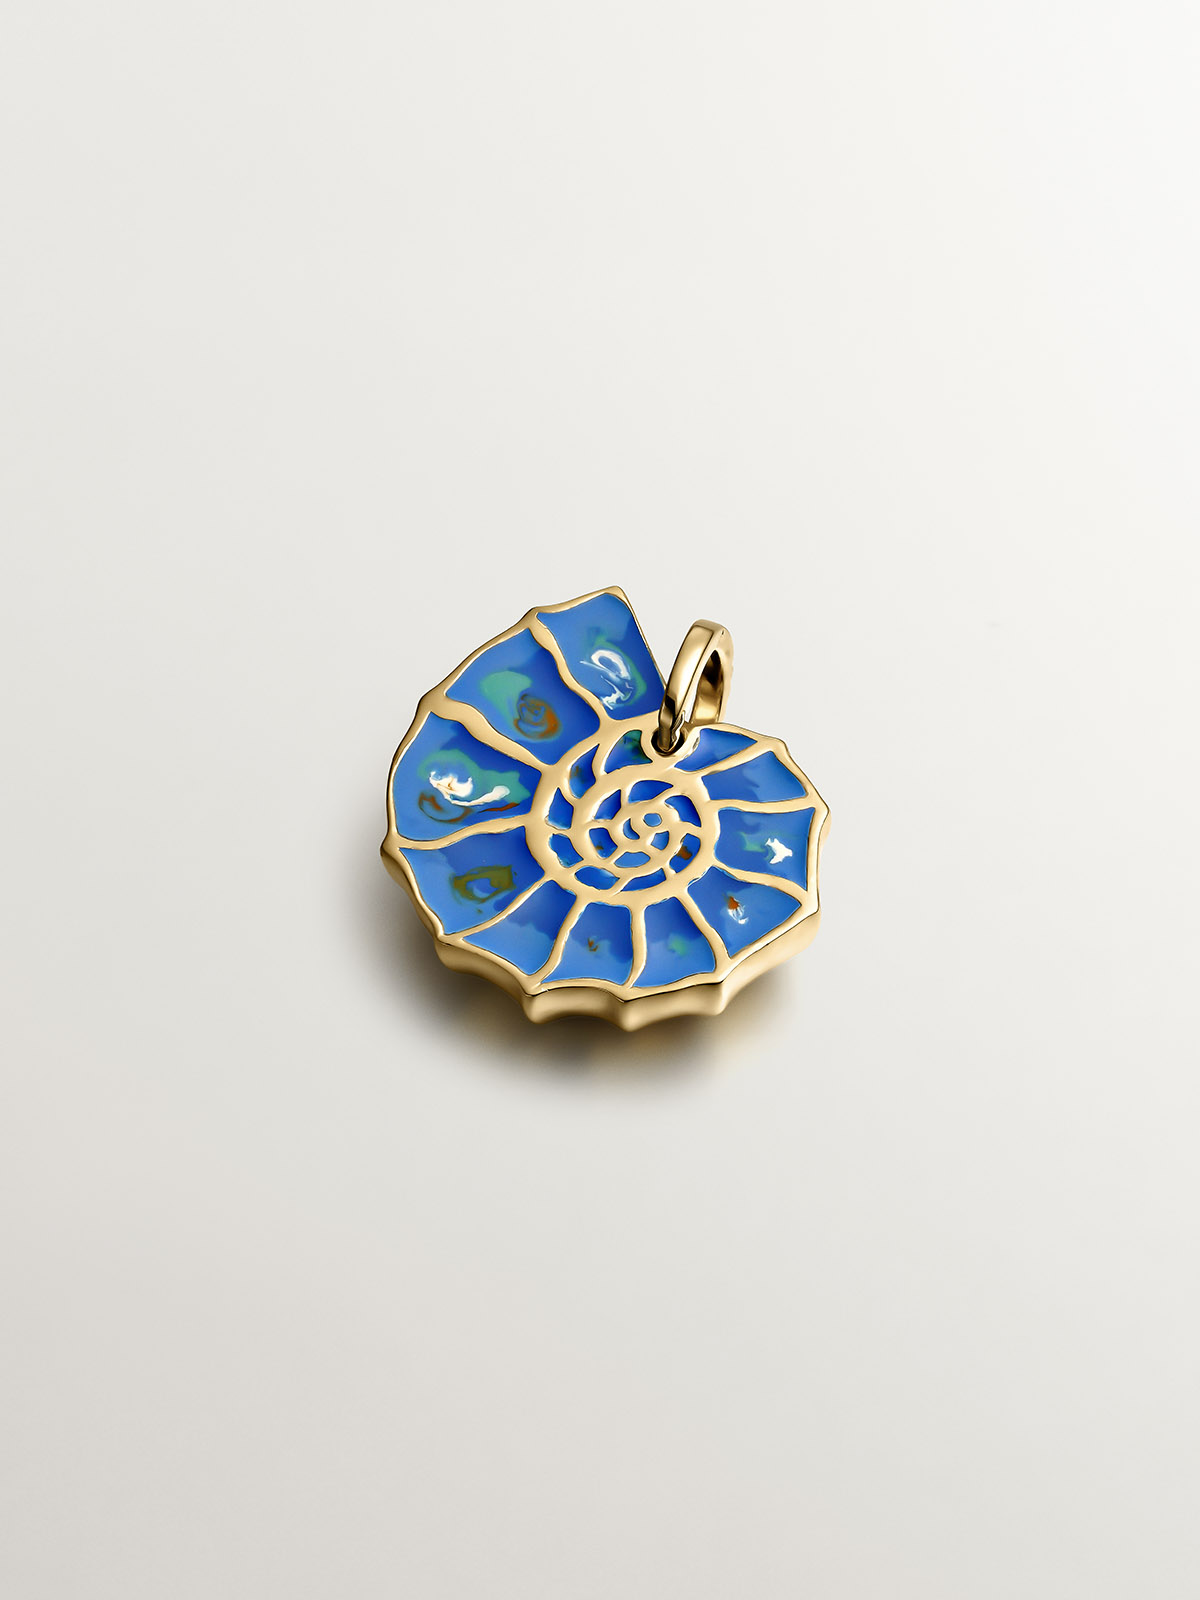 925 silver charm plated in 18K yellow gold with blue enameling and white topazes shaped like a shell.